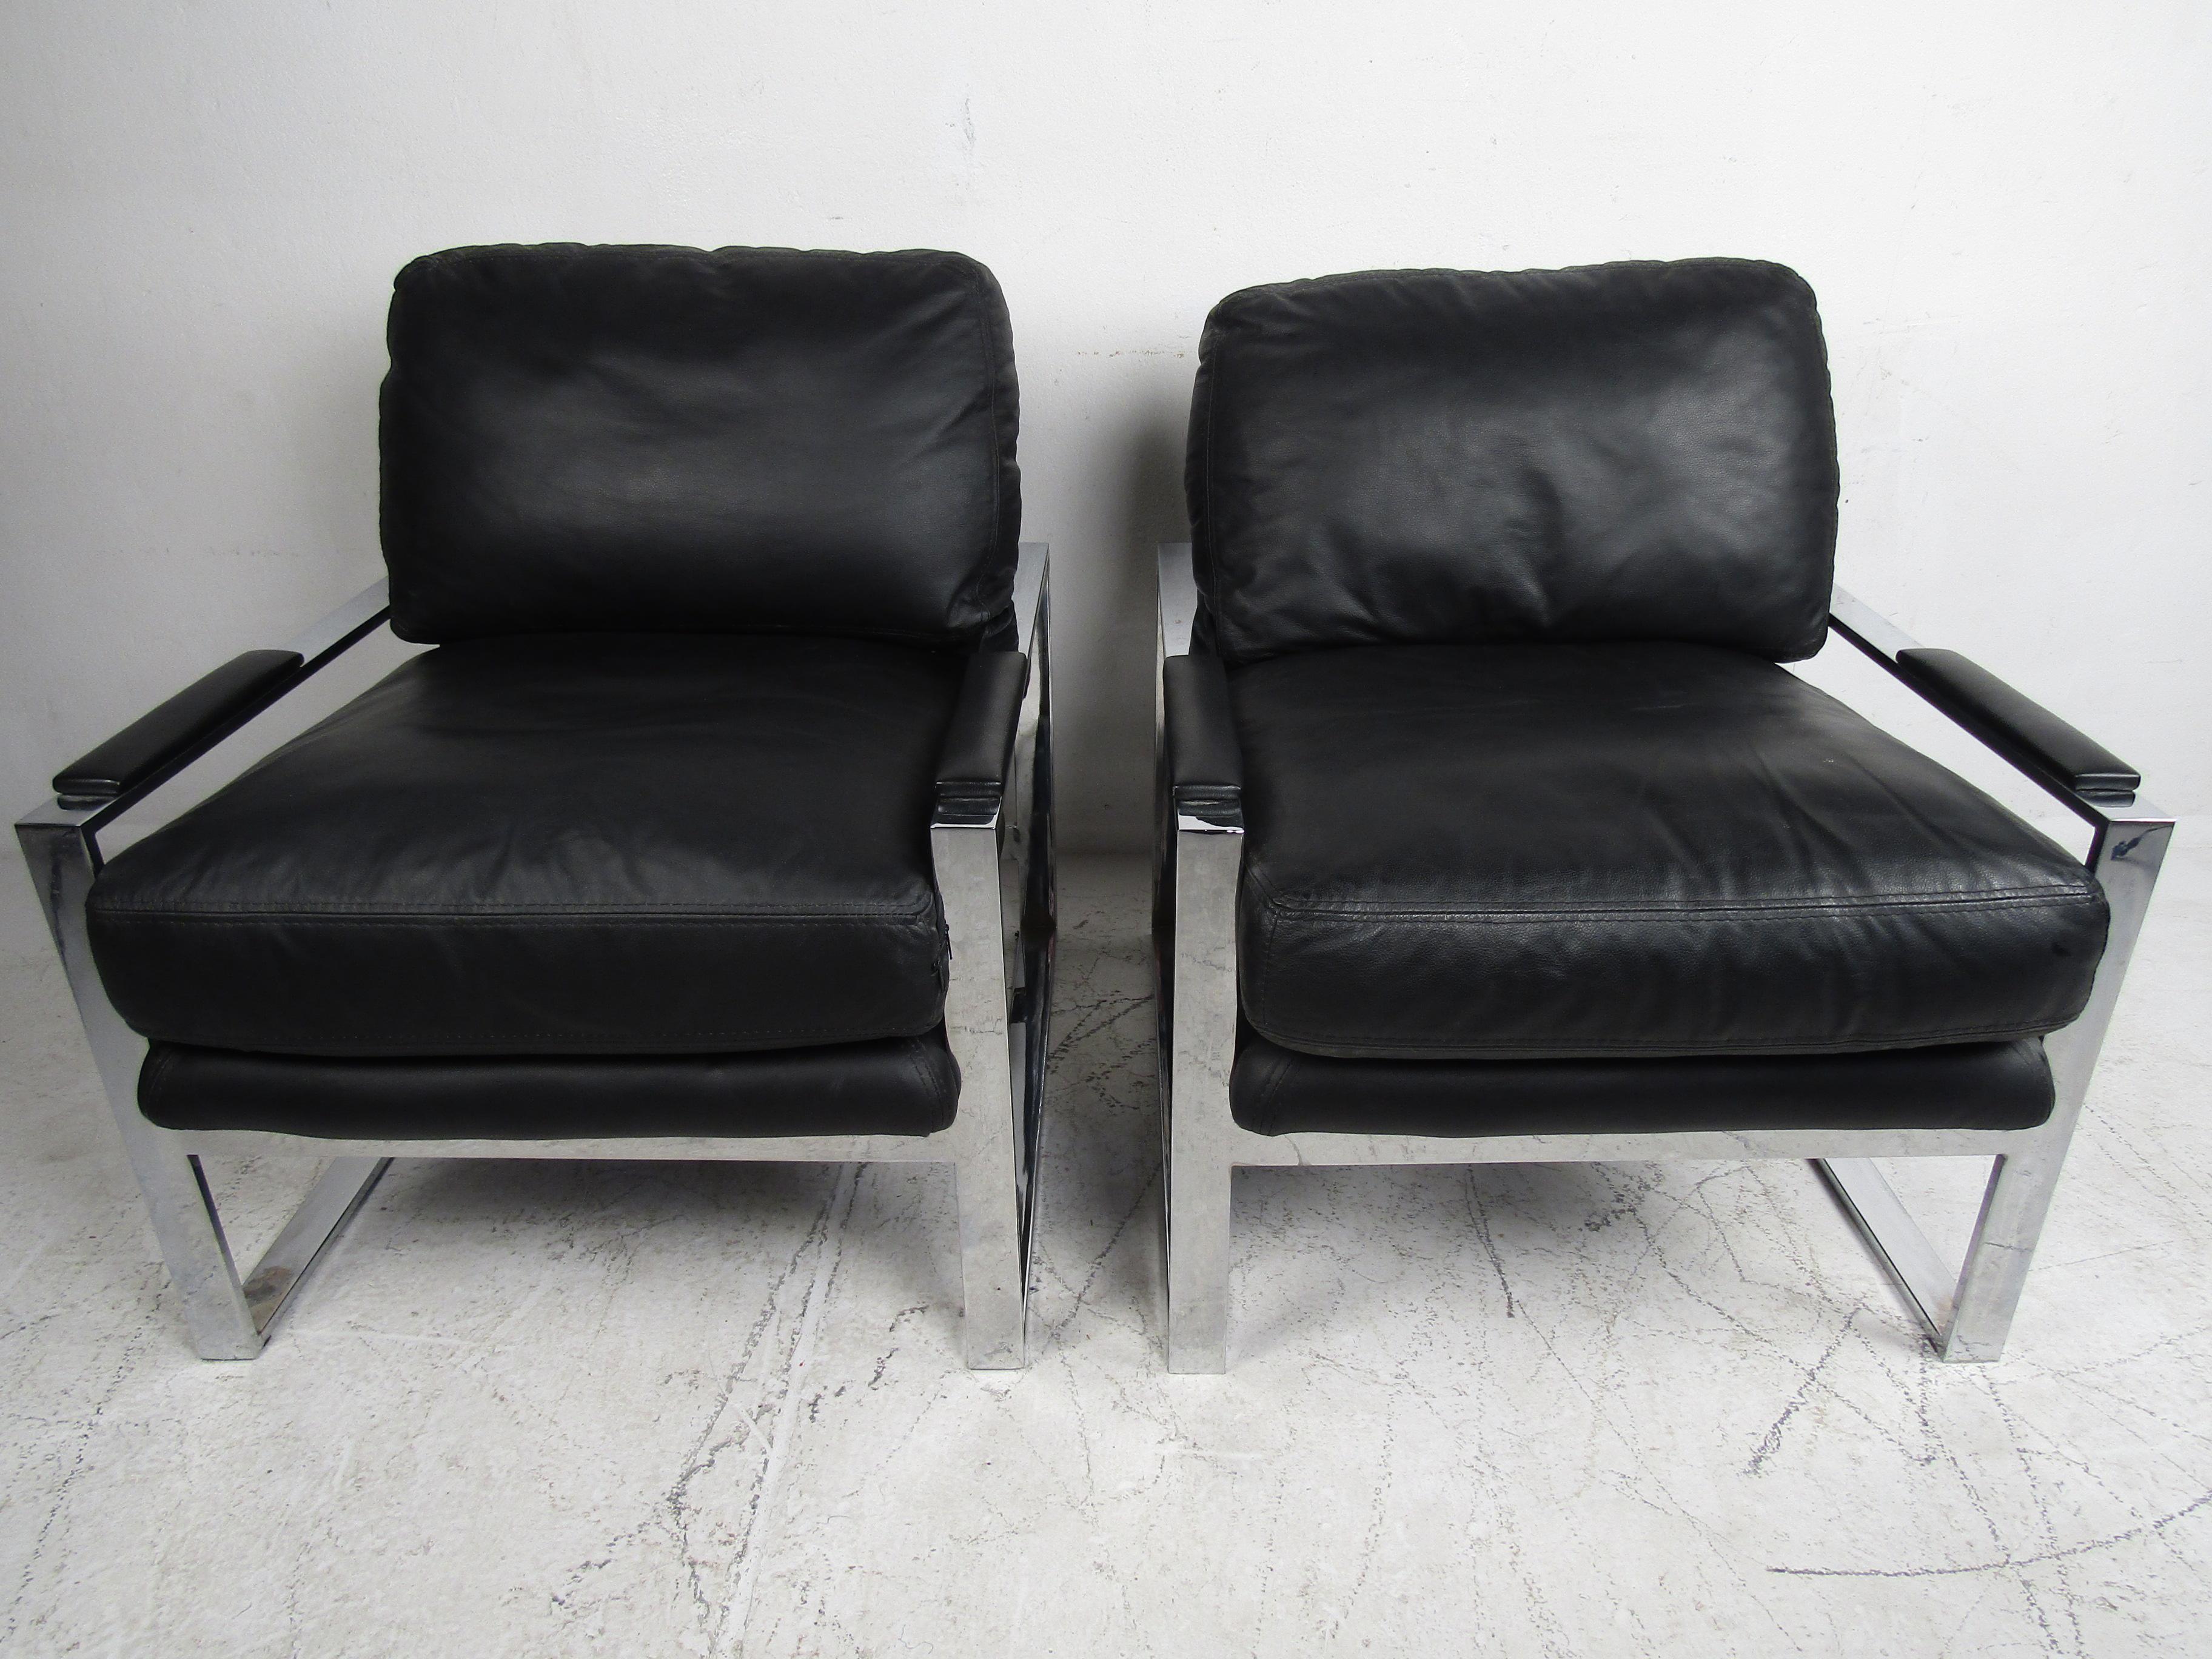 Late 20th Century Pair of Black Leather Baughman Style Contemporary Lounge Chairs